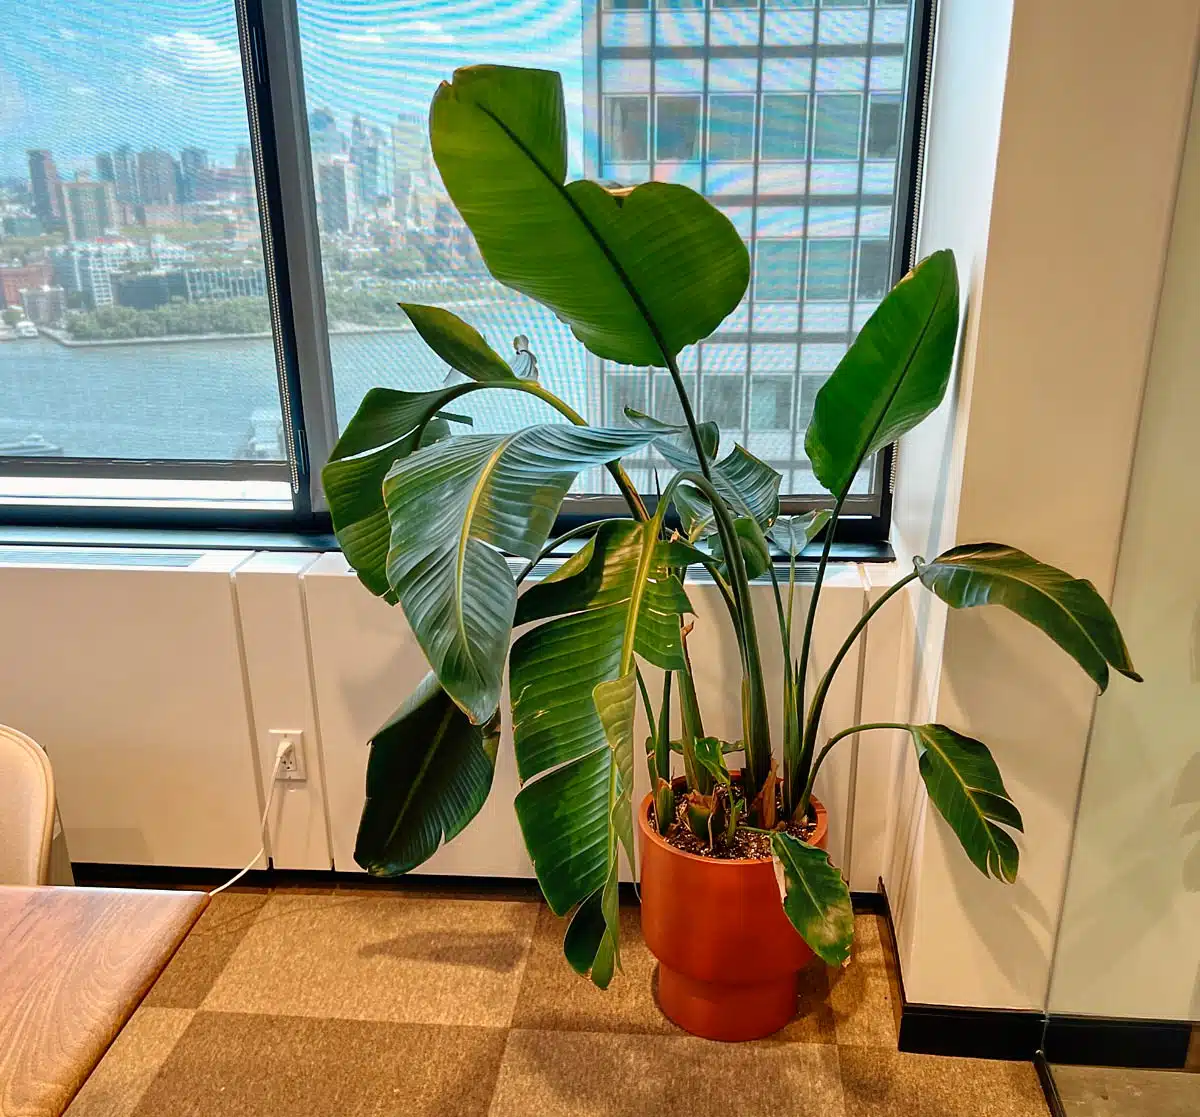 A Bird of Paradise plant requiring pruning, with broad green leaves in a terracotta pot, positioned by a window with a city skyline and river view.